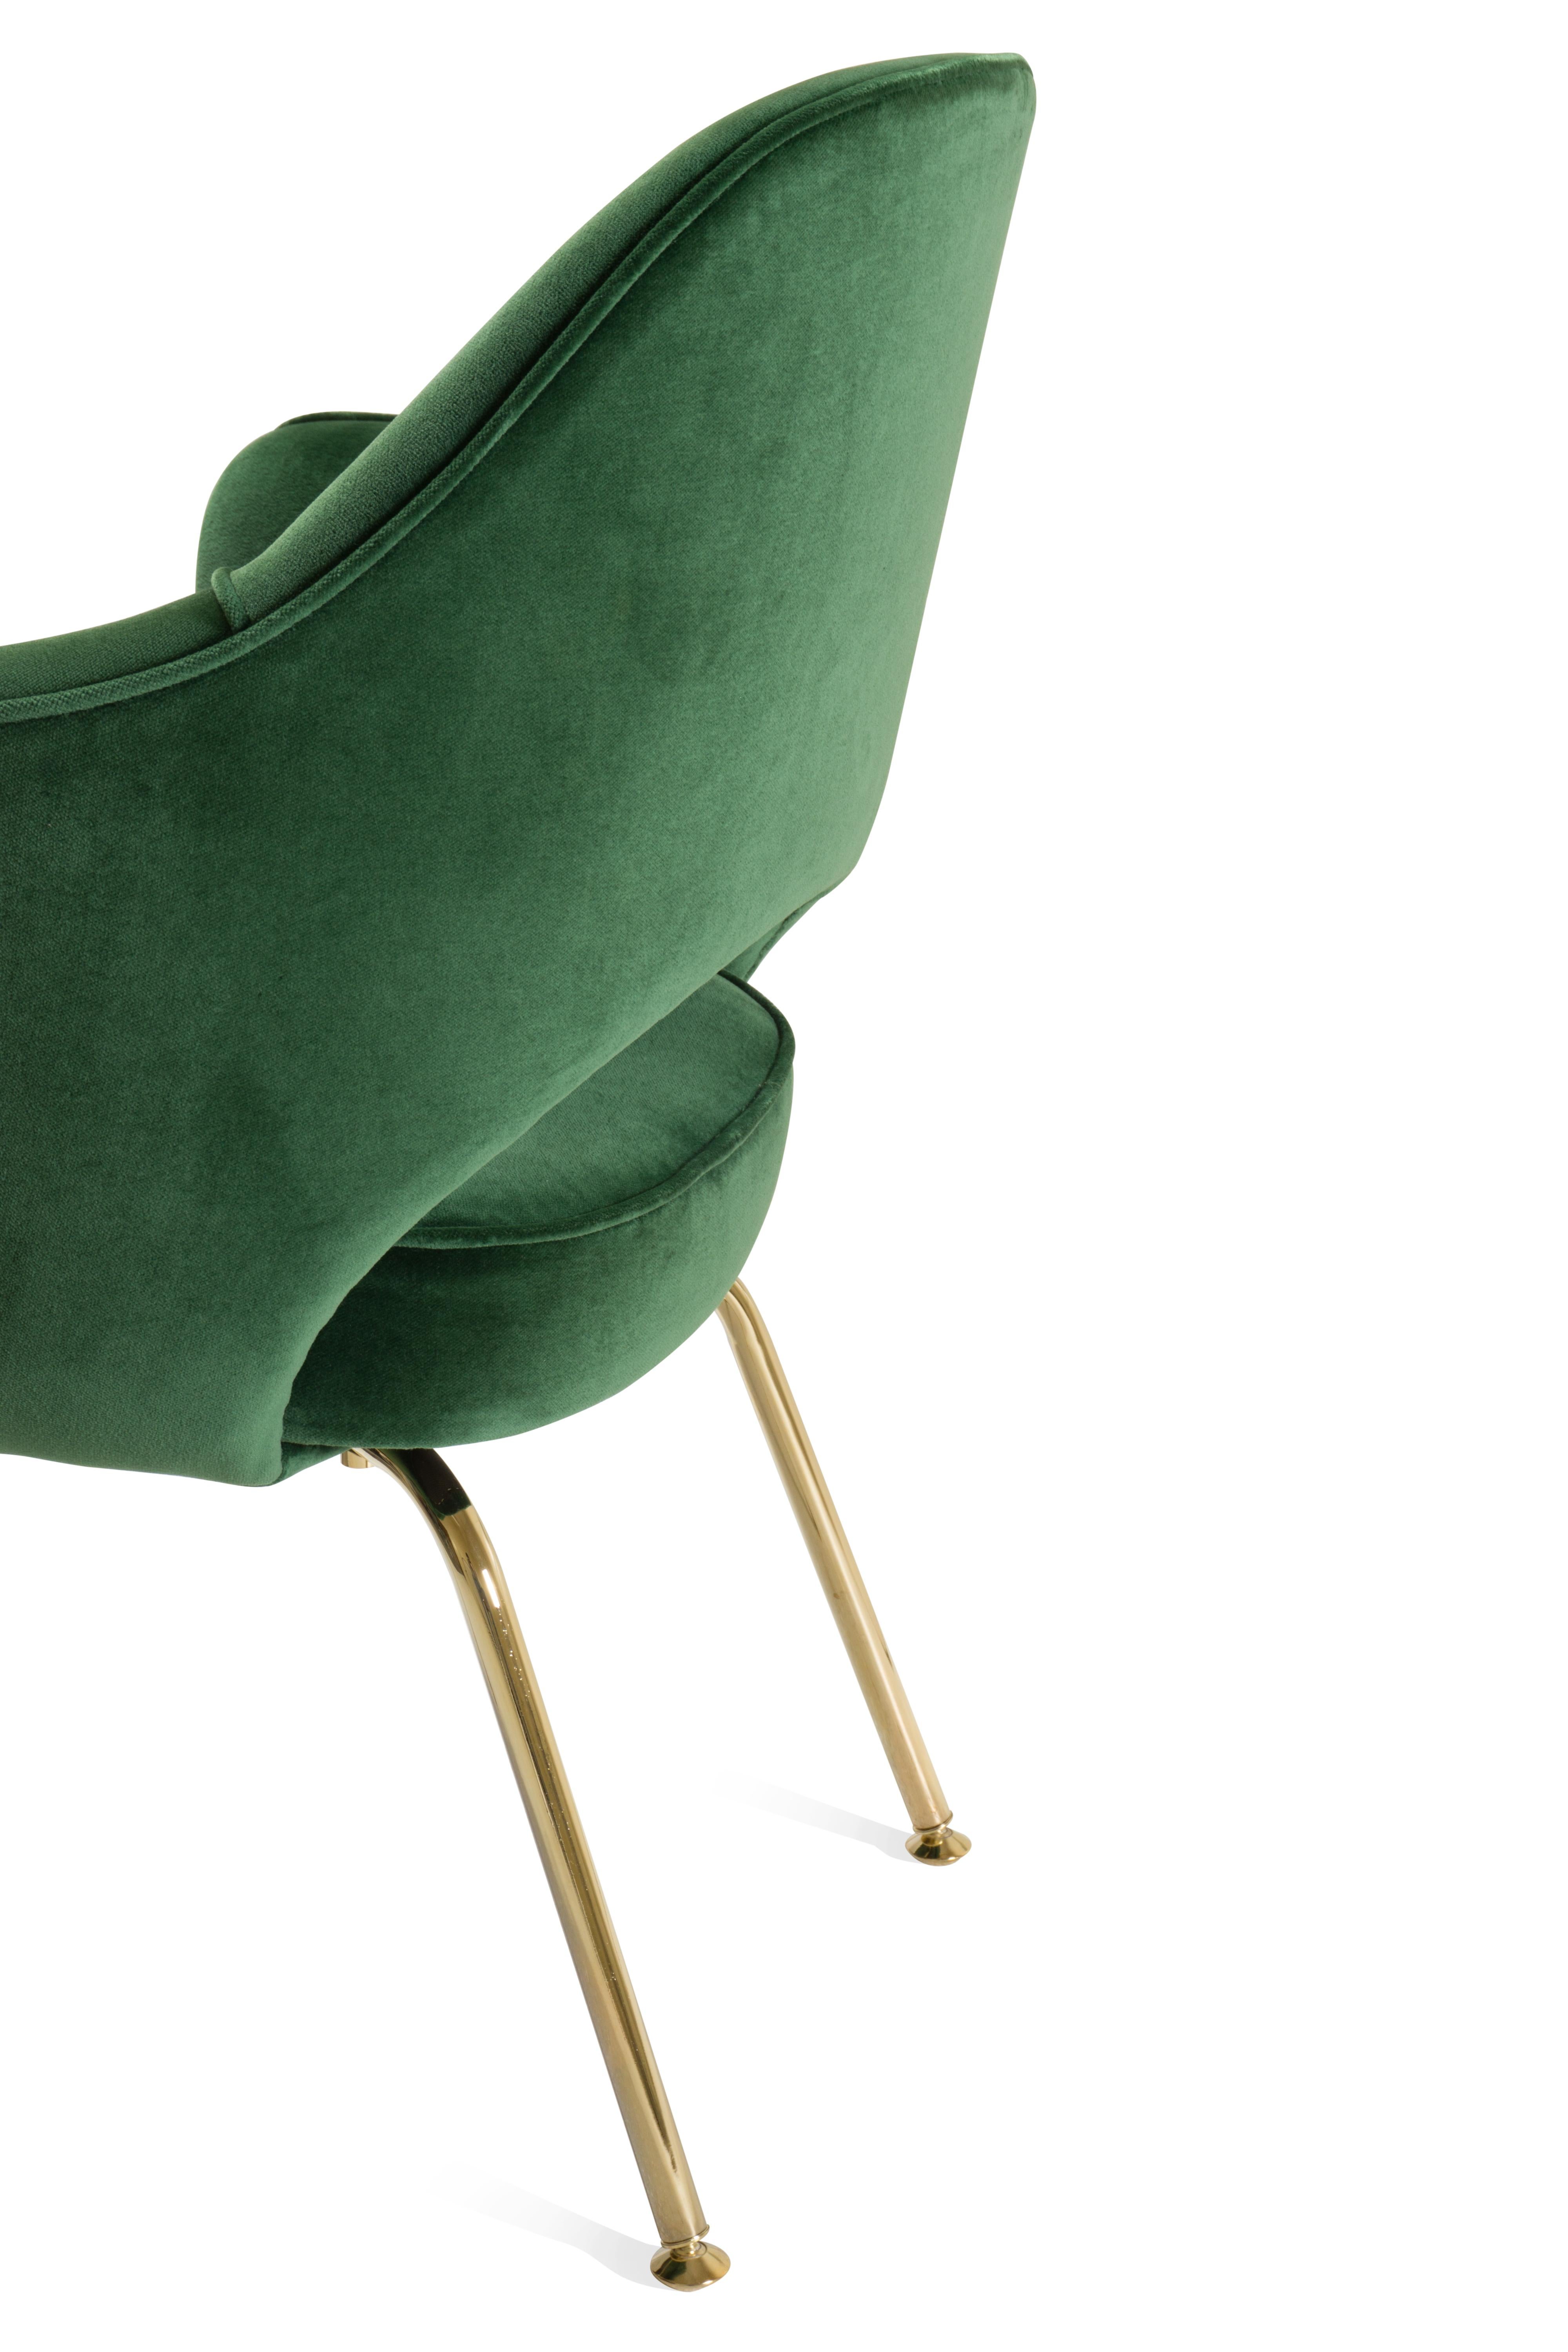 Late 20th Century Saarinen Executive Arm Chairs in Emerald Velvet, Gold Edition, Set of 6 For Sale